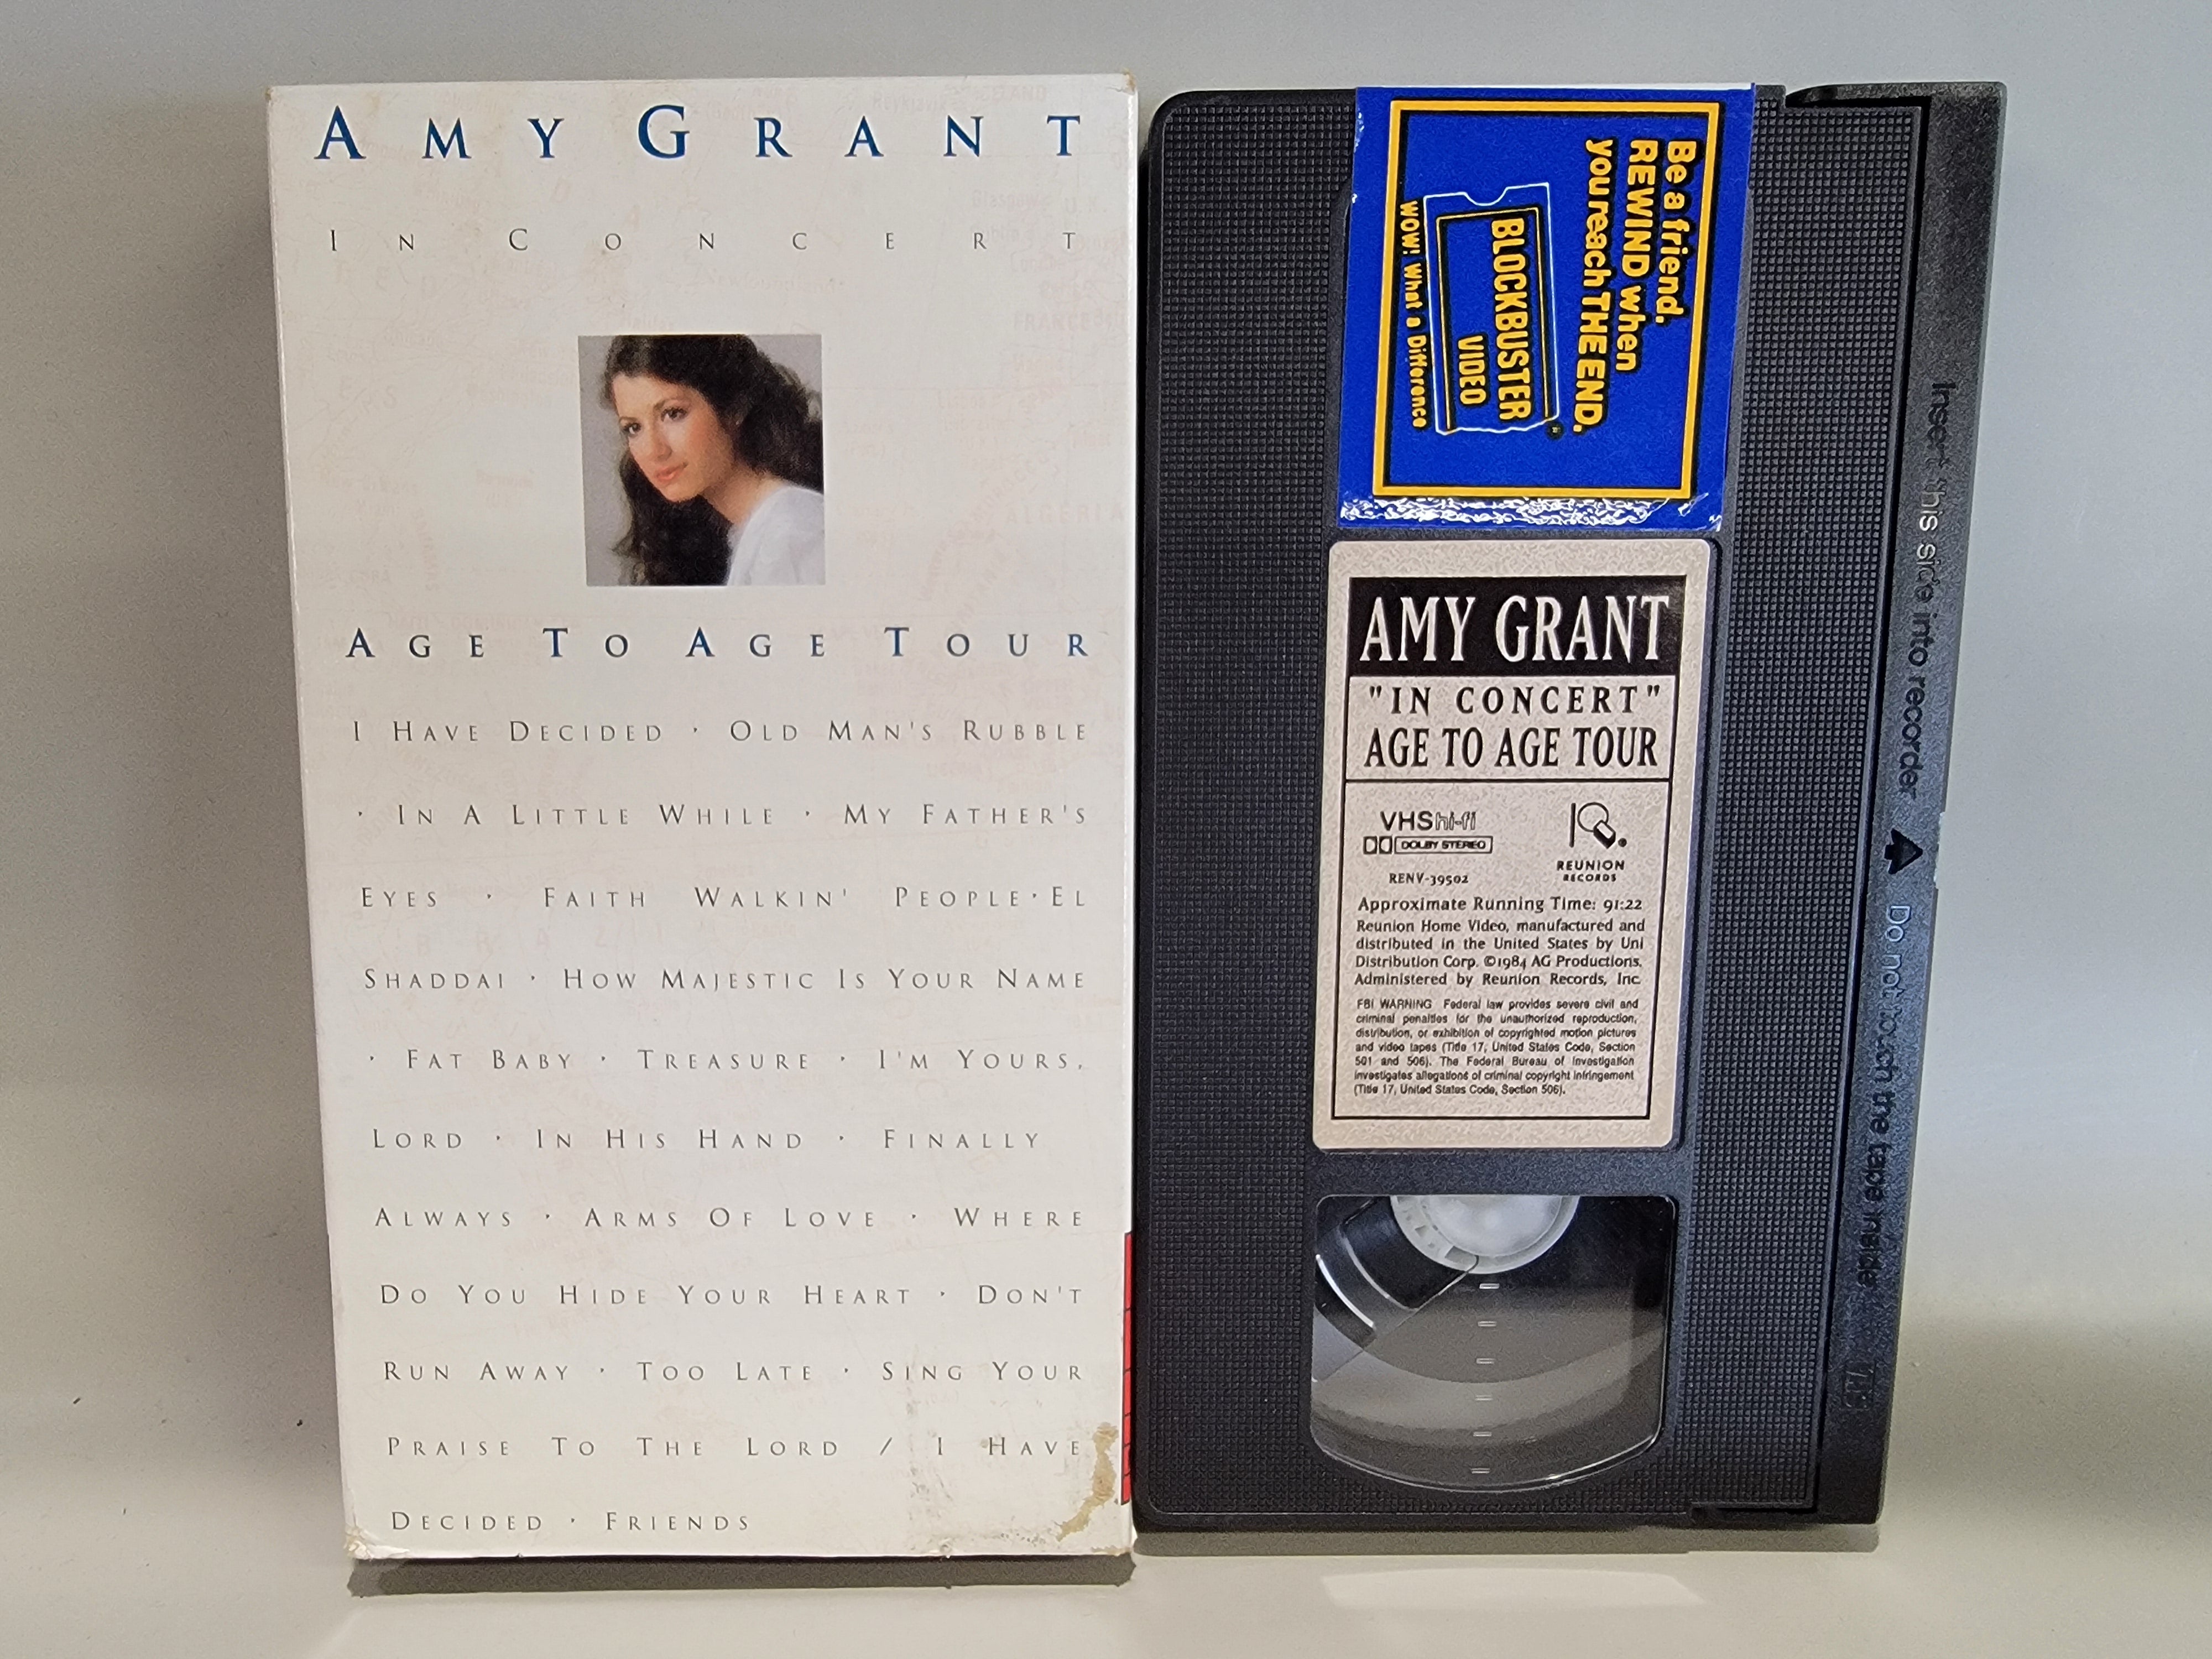 AMY GRANT: AGE TO AGE TOUR VHS [USED]